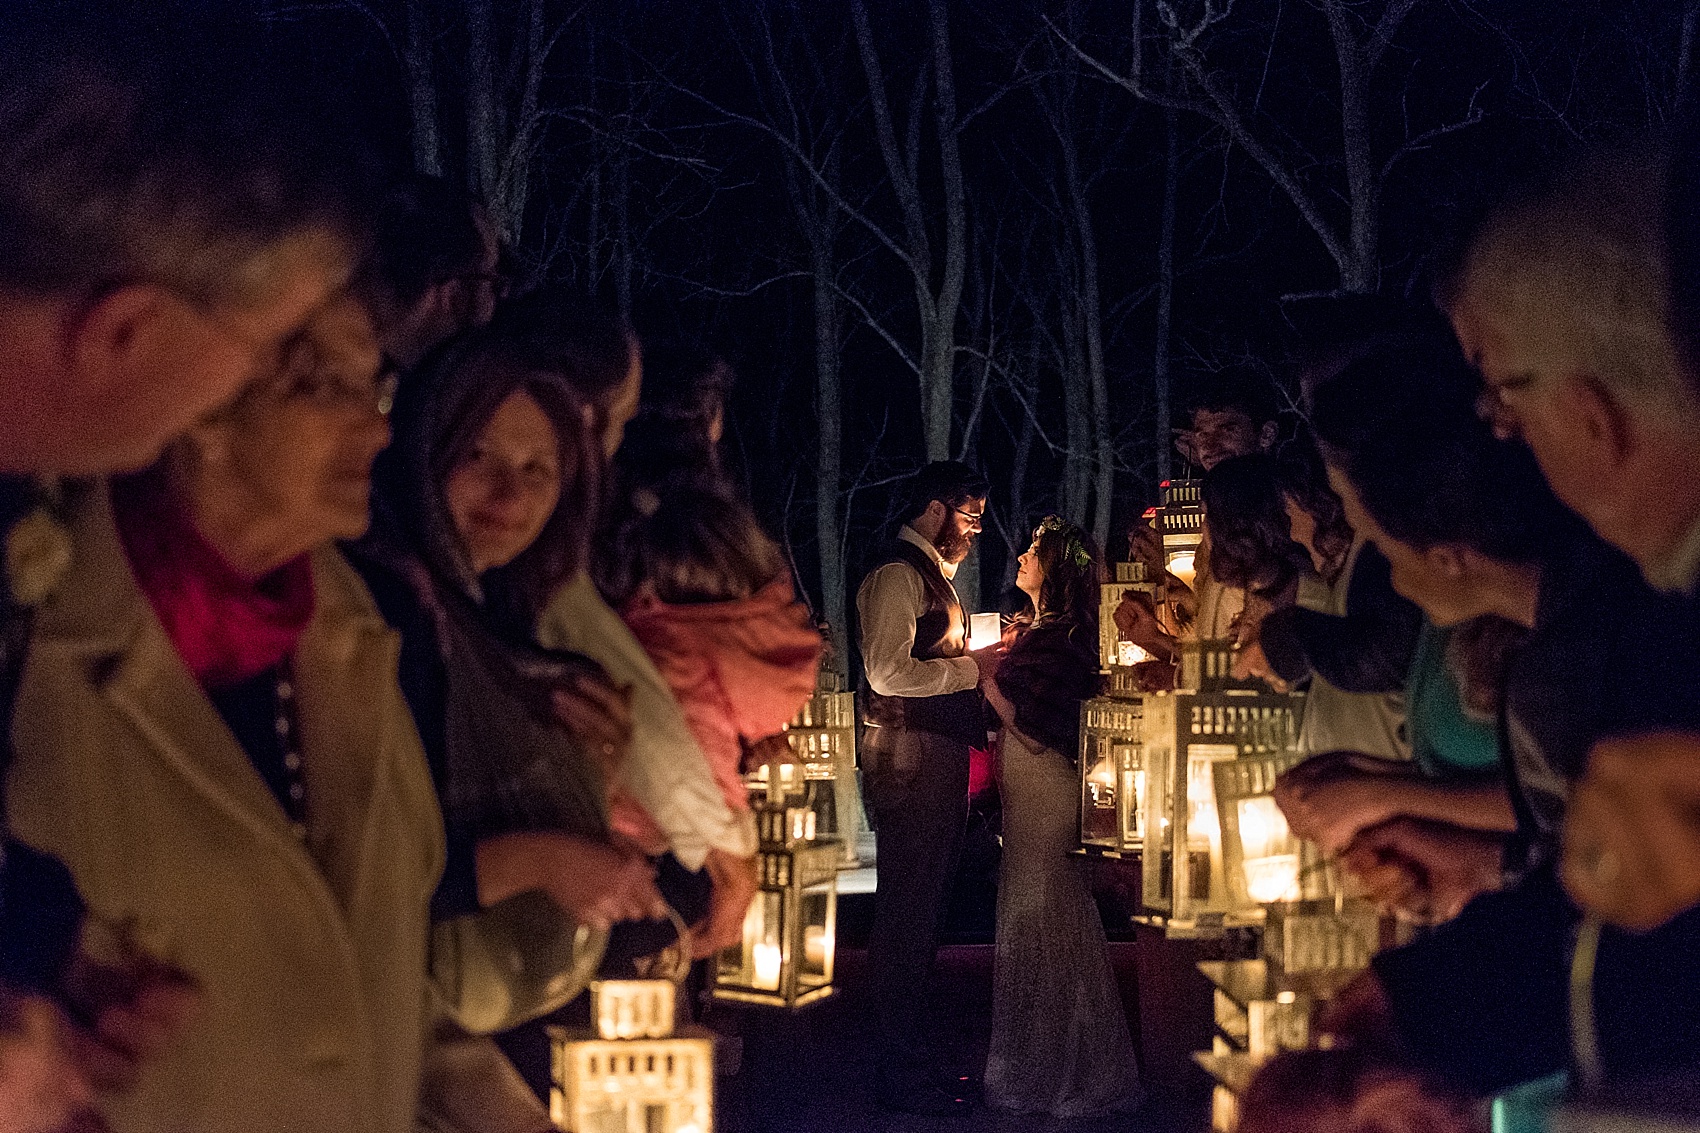 Evening wedding photos by Ben Hartley (on standing out in a crowded photography market)